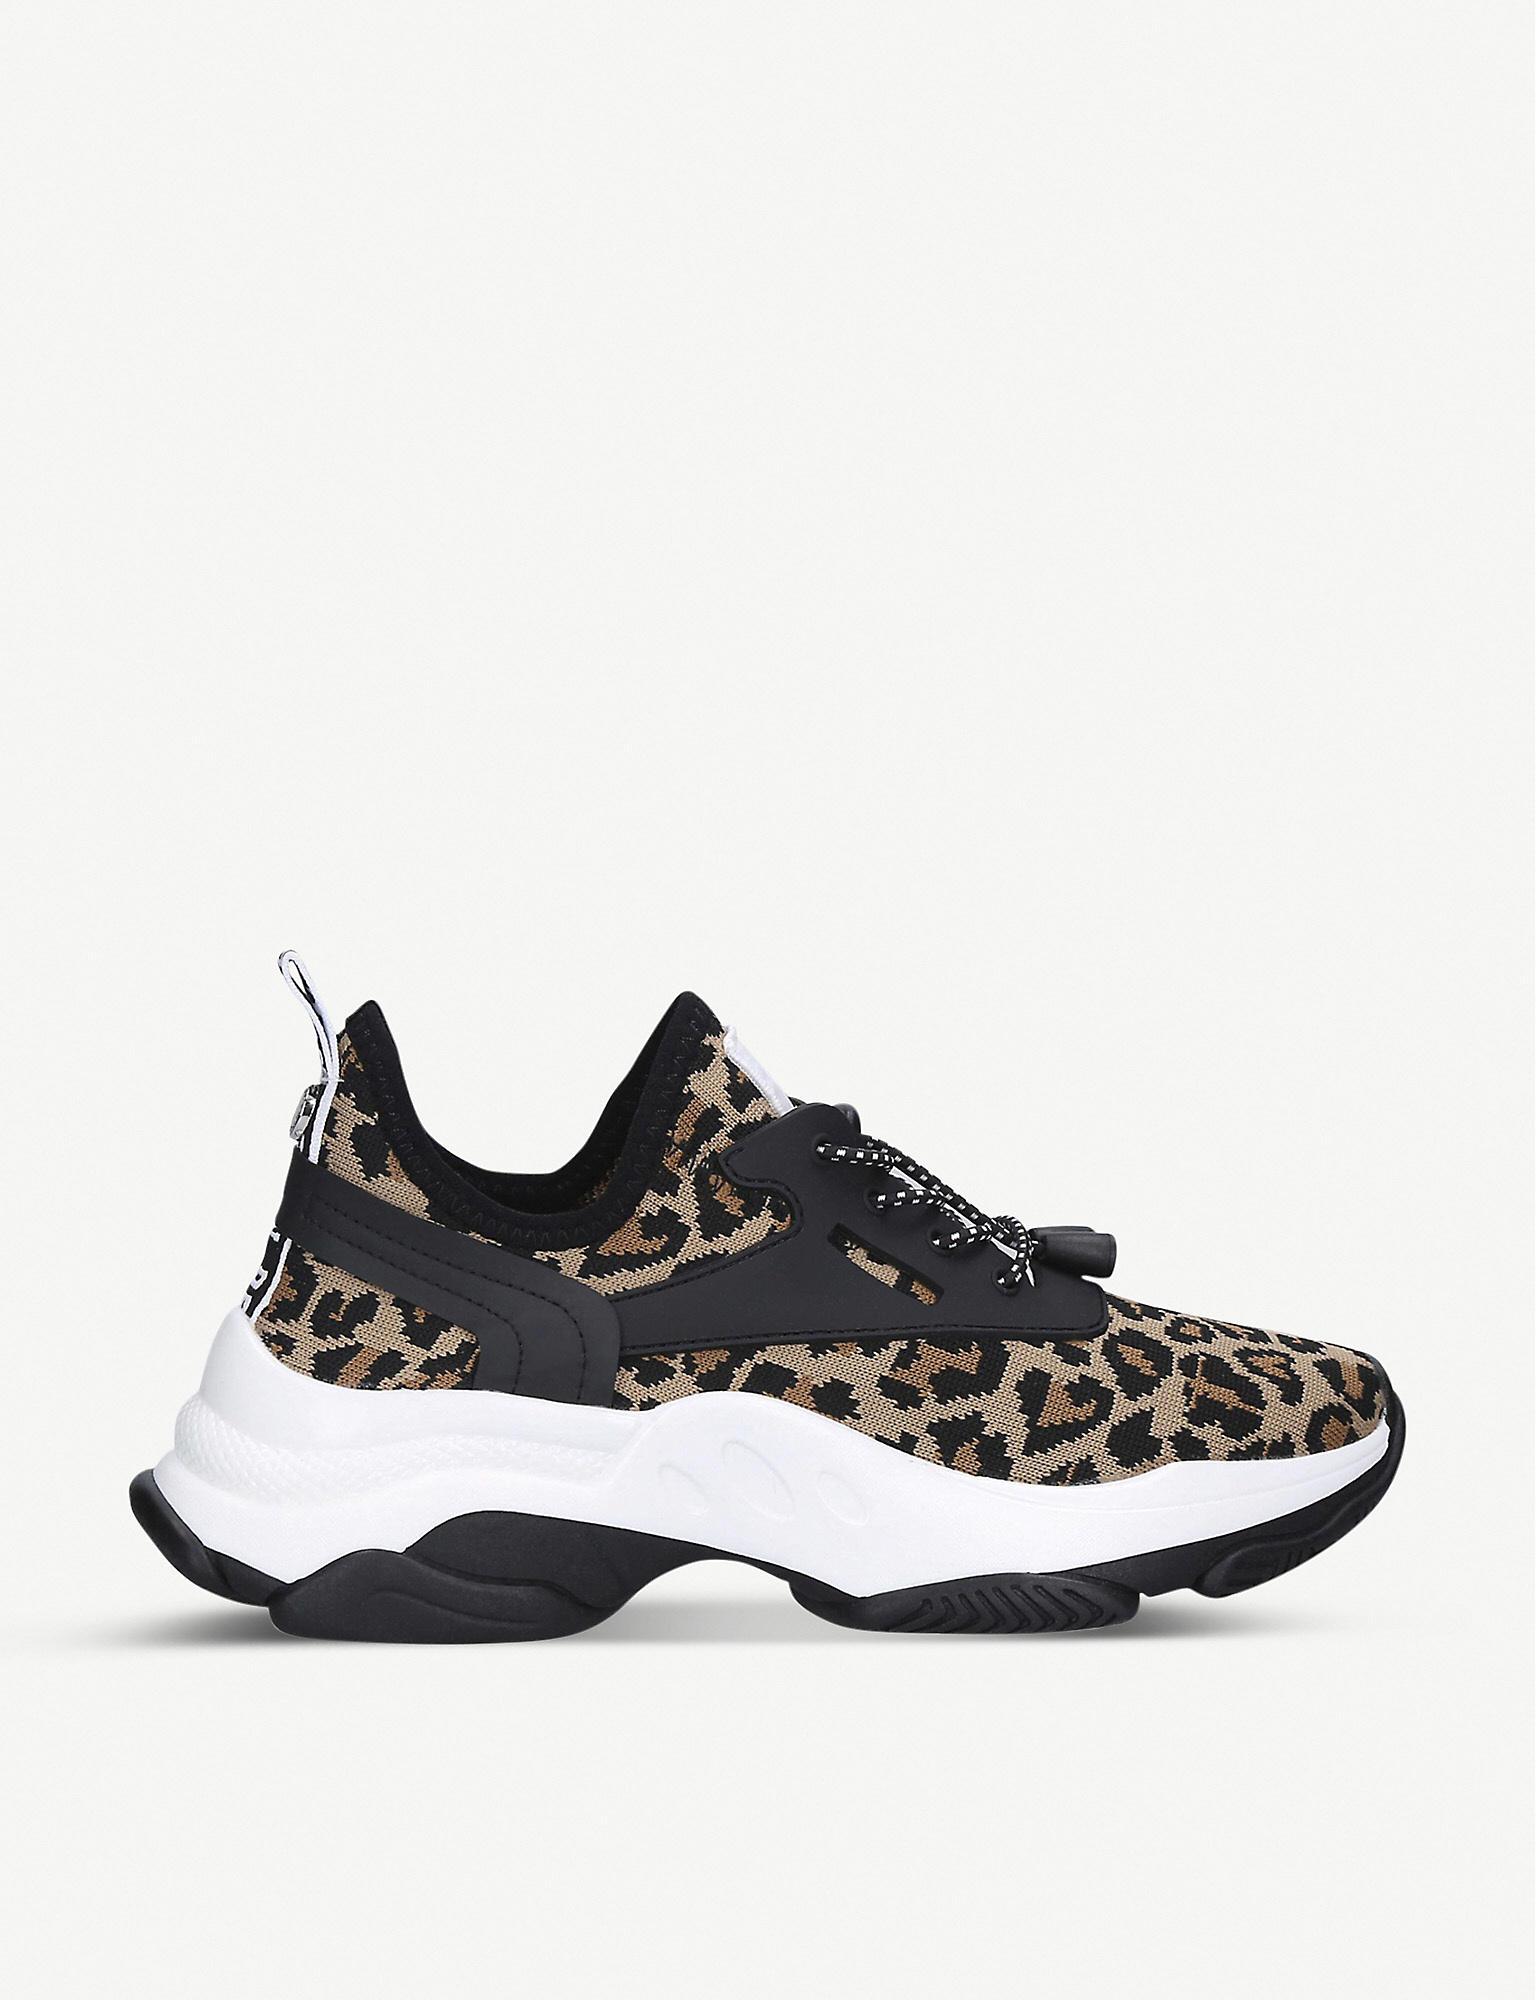 Steve Madden Match Animal-print Knitted Trainers in Black | Lyst